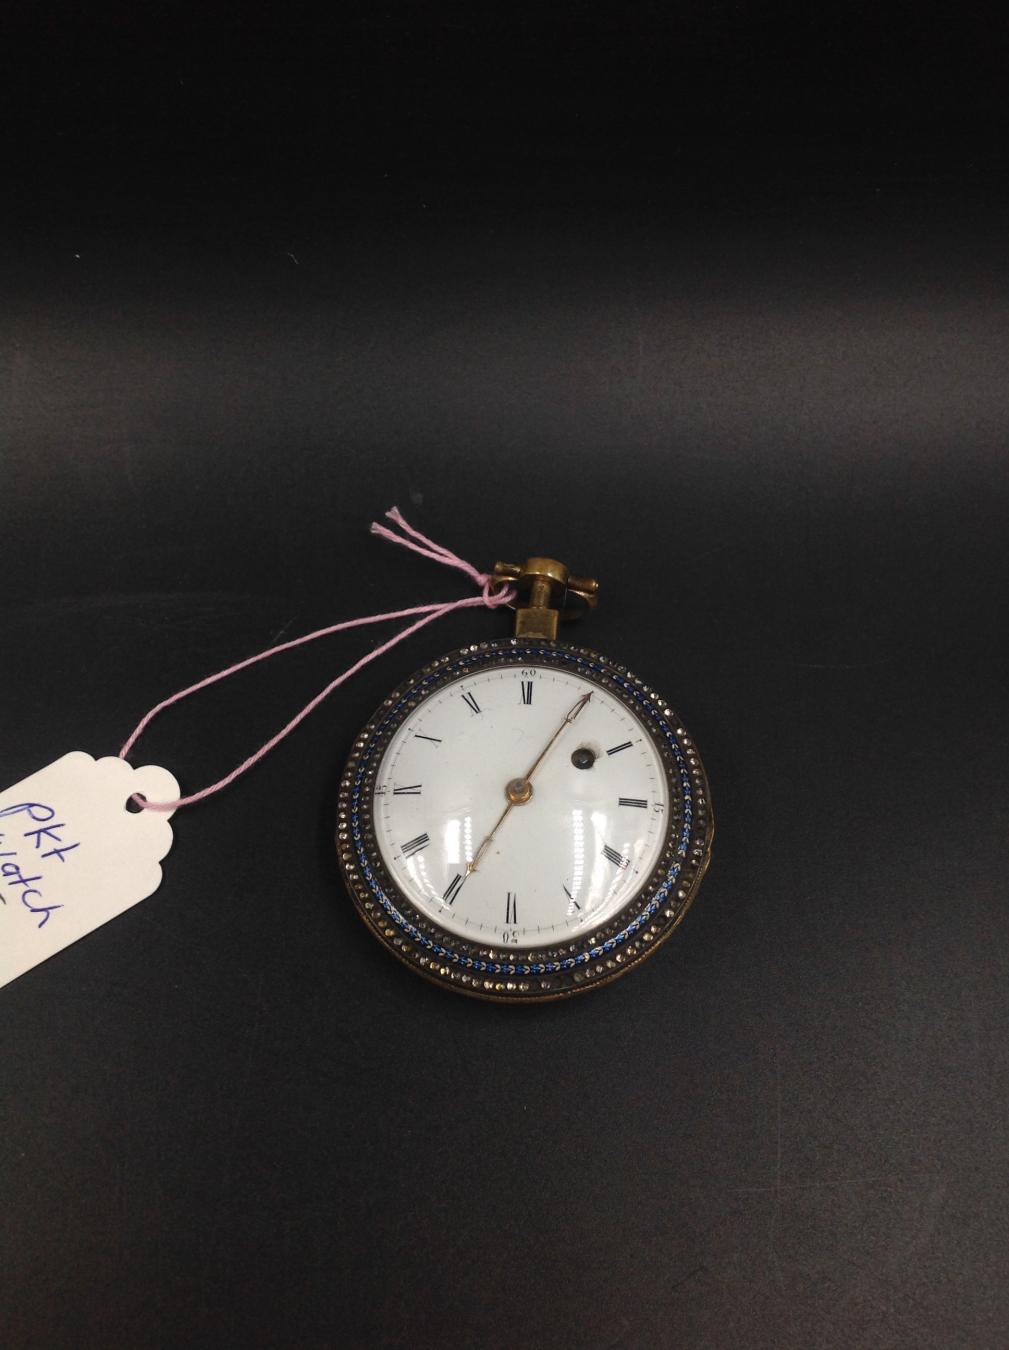 A GOOD LATE 18th/EARLY 19th.C. POCKET WATCH. UNSIGNED SINGLE FUSEE MOVEMENT. DOMED ENAMEL DIAL, - Image 3 of 6